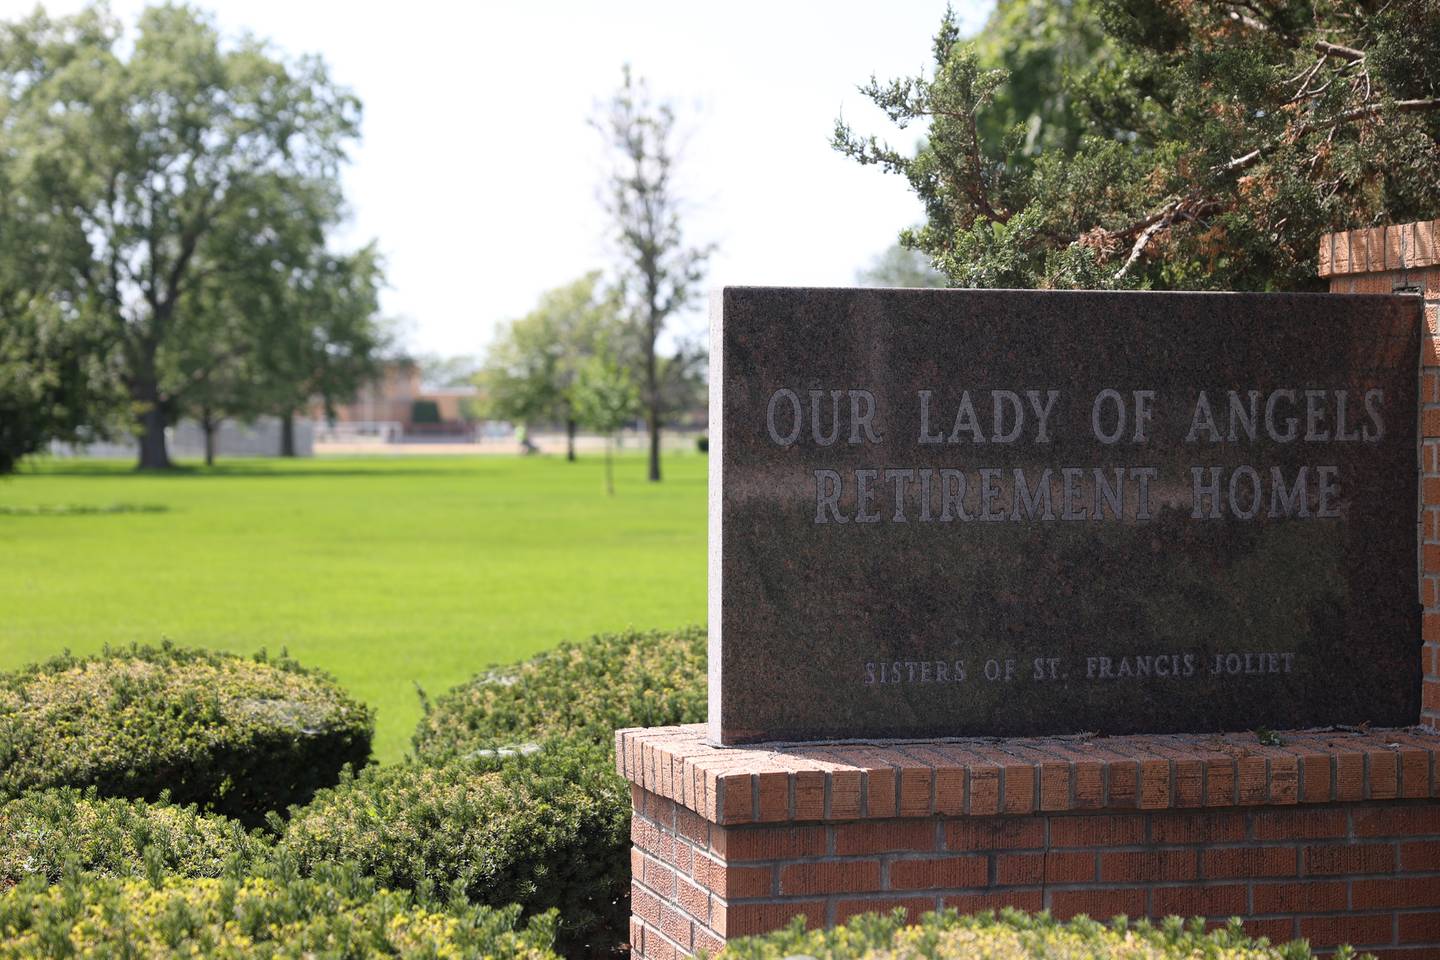 Our Lady of Angels is schedule to be demolished. Joliet Catholic Academy, seen in the background, is interested in purchasing neighboring Our Lady of Angels to expand the campus.